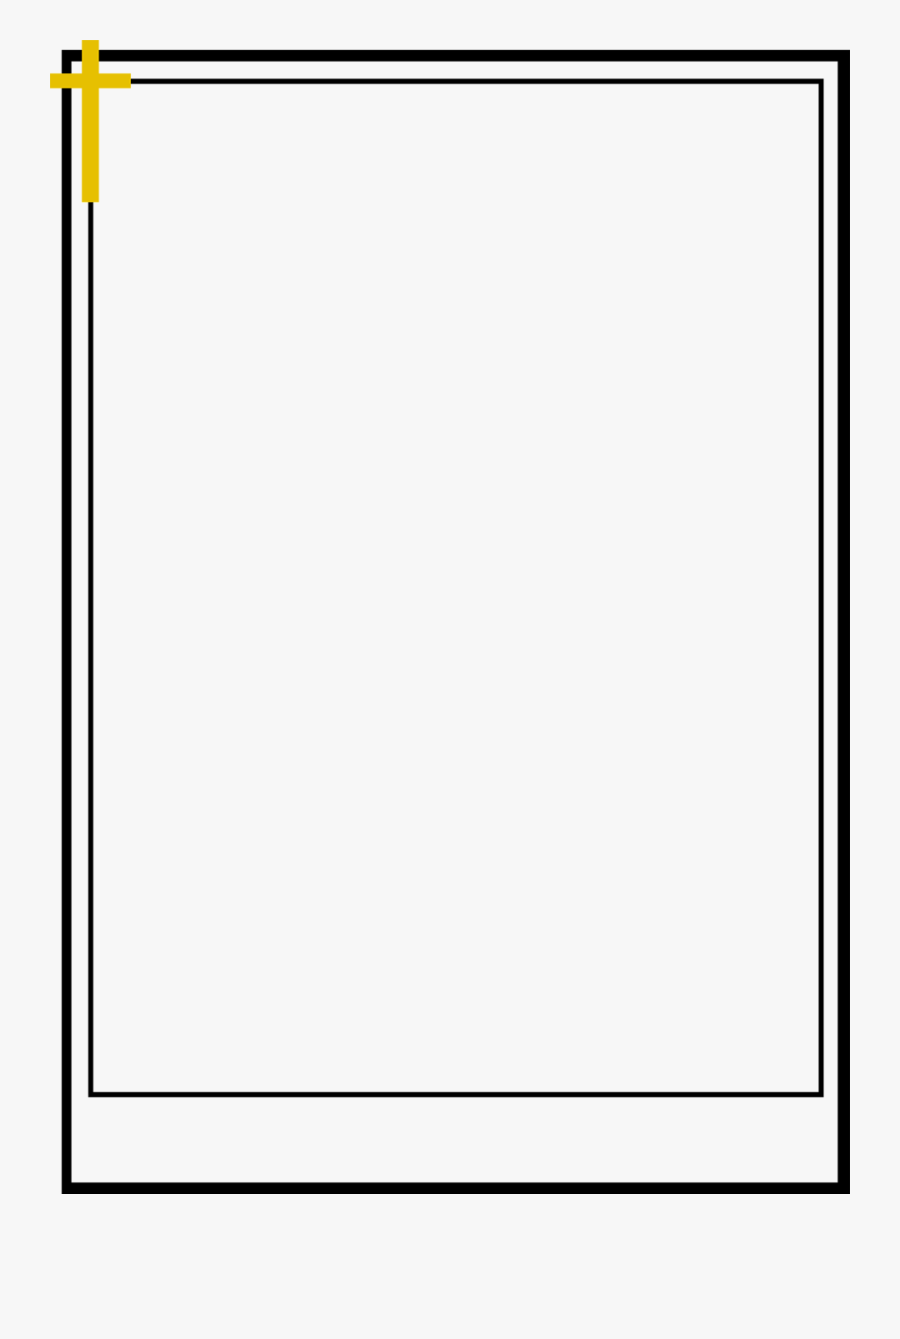 Border Free Stock Photo Illustration Of A Blank Frame - Symmetry, Transparent Clipart